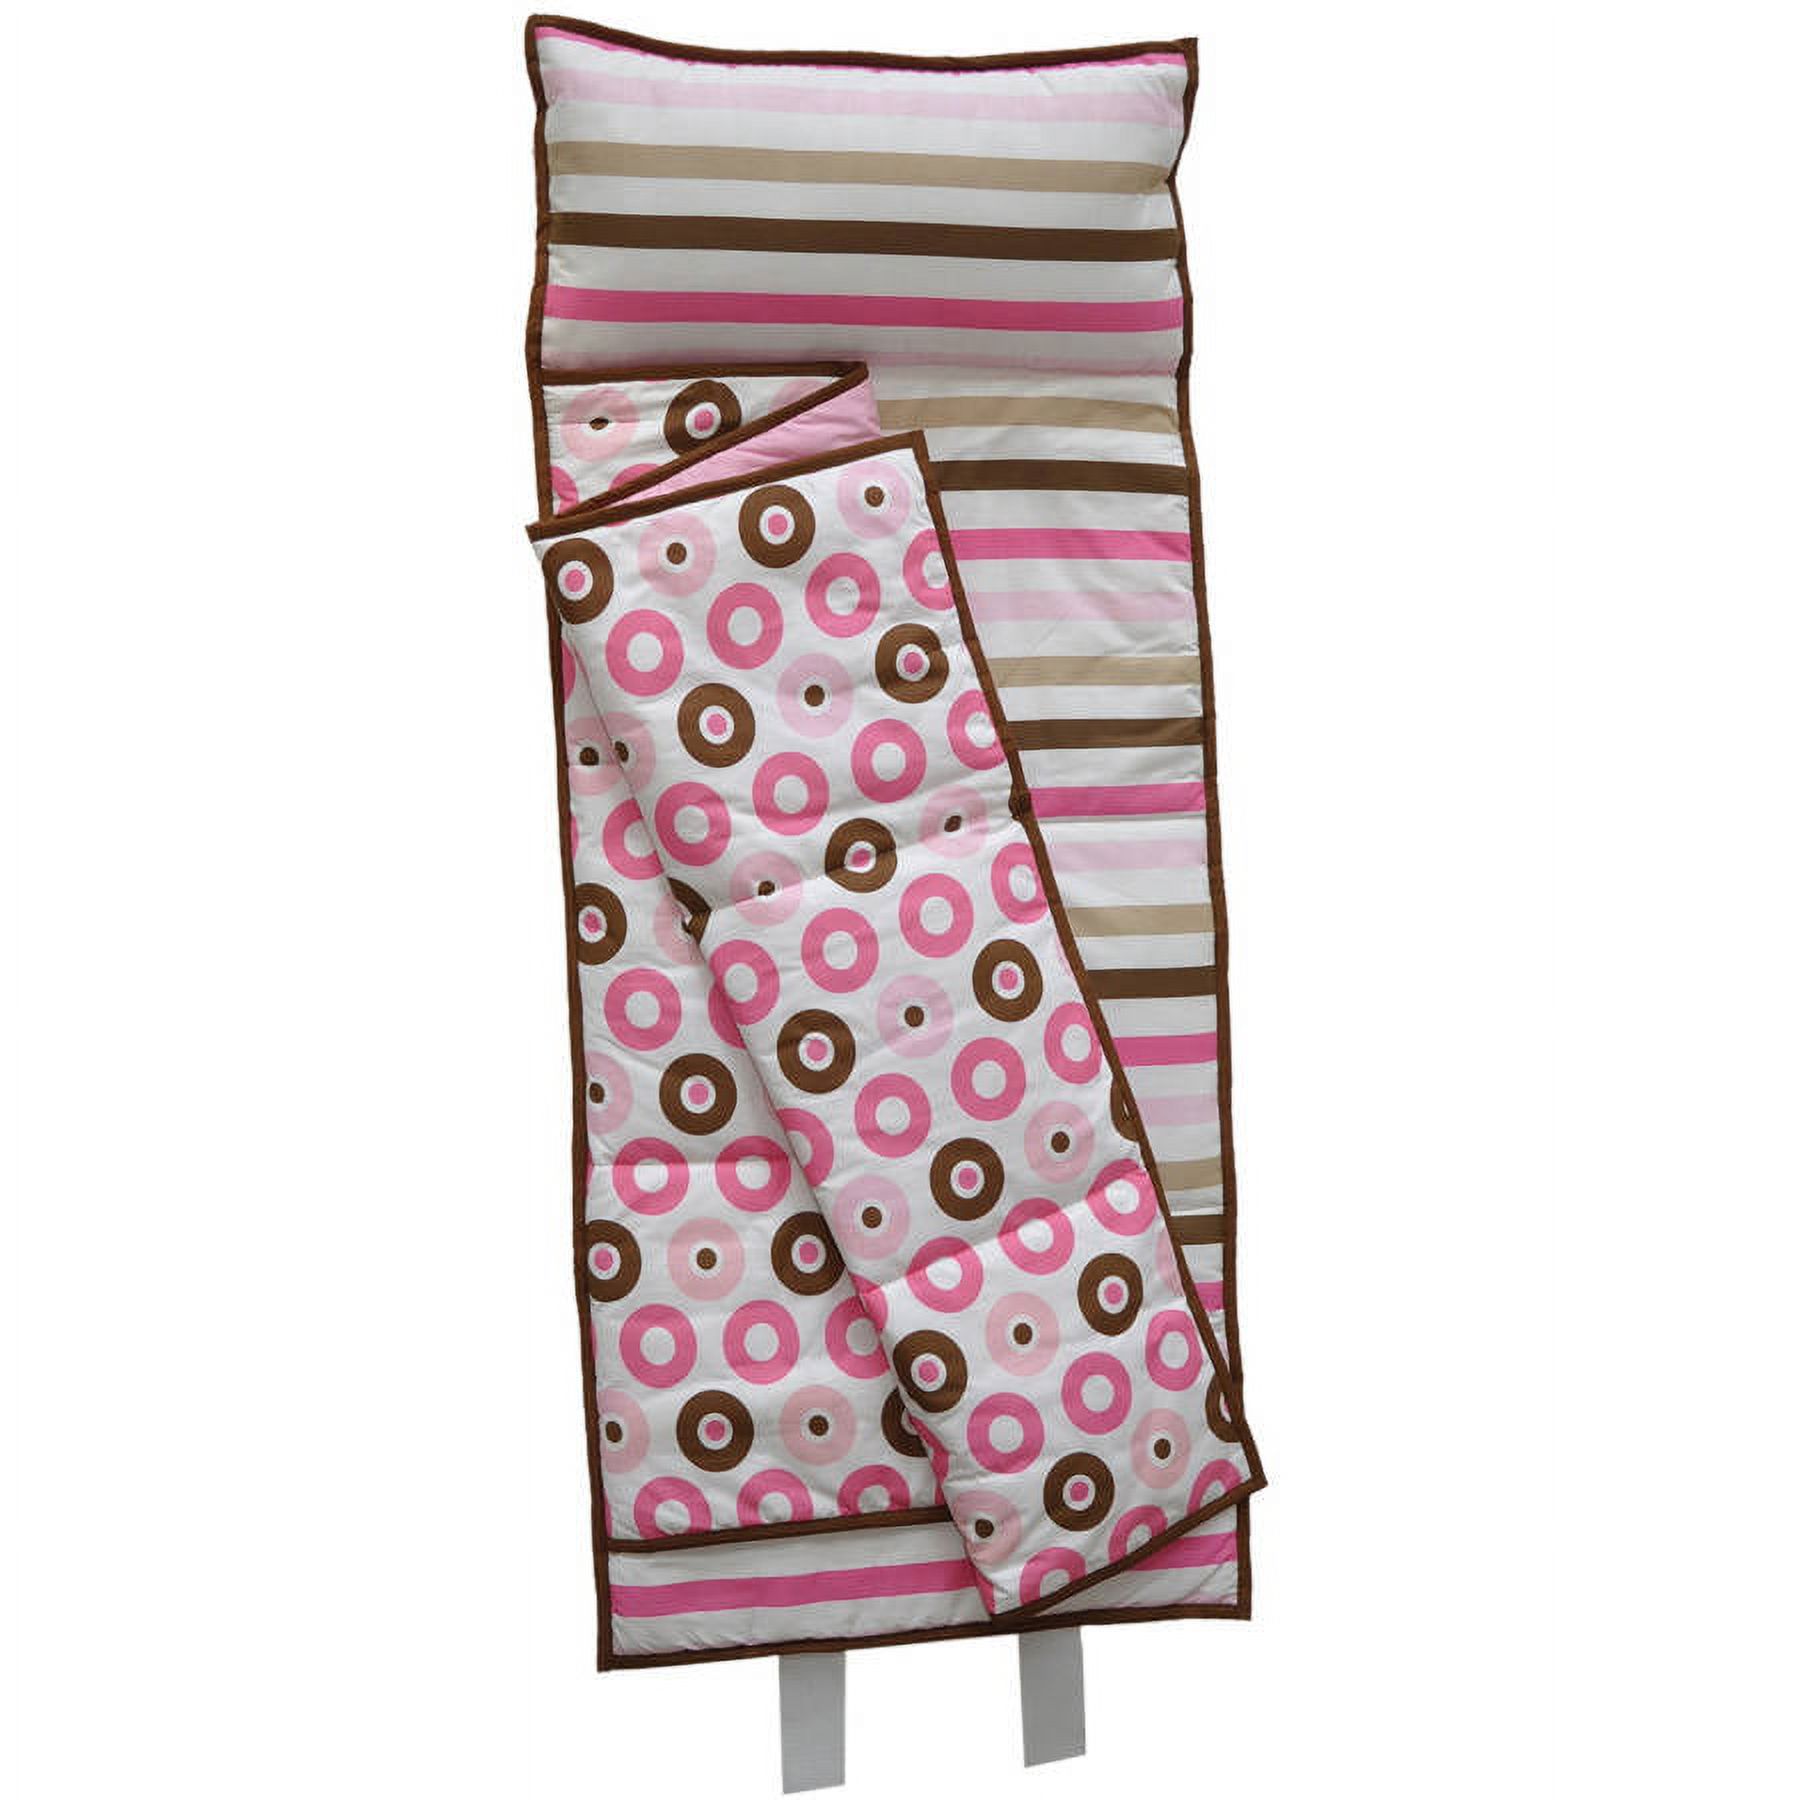 Bacati - Mod Dots/StripesToddler Nap Mat in Pink, 100% Cotton Percale with attached pillow, size 20 x 50 inches - image 5 of 5